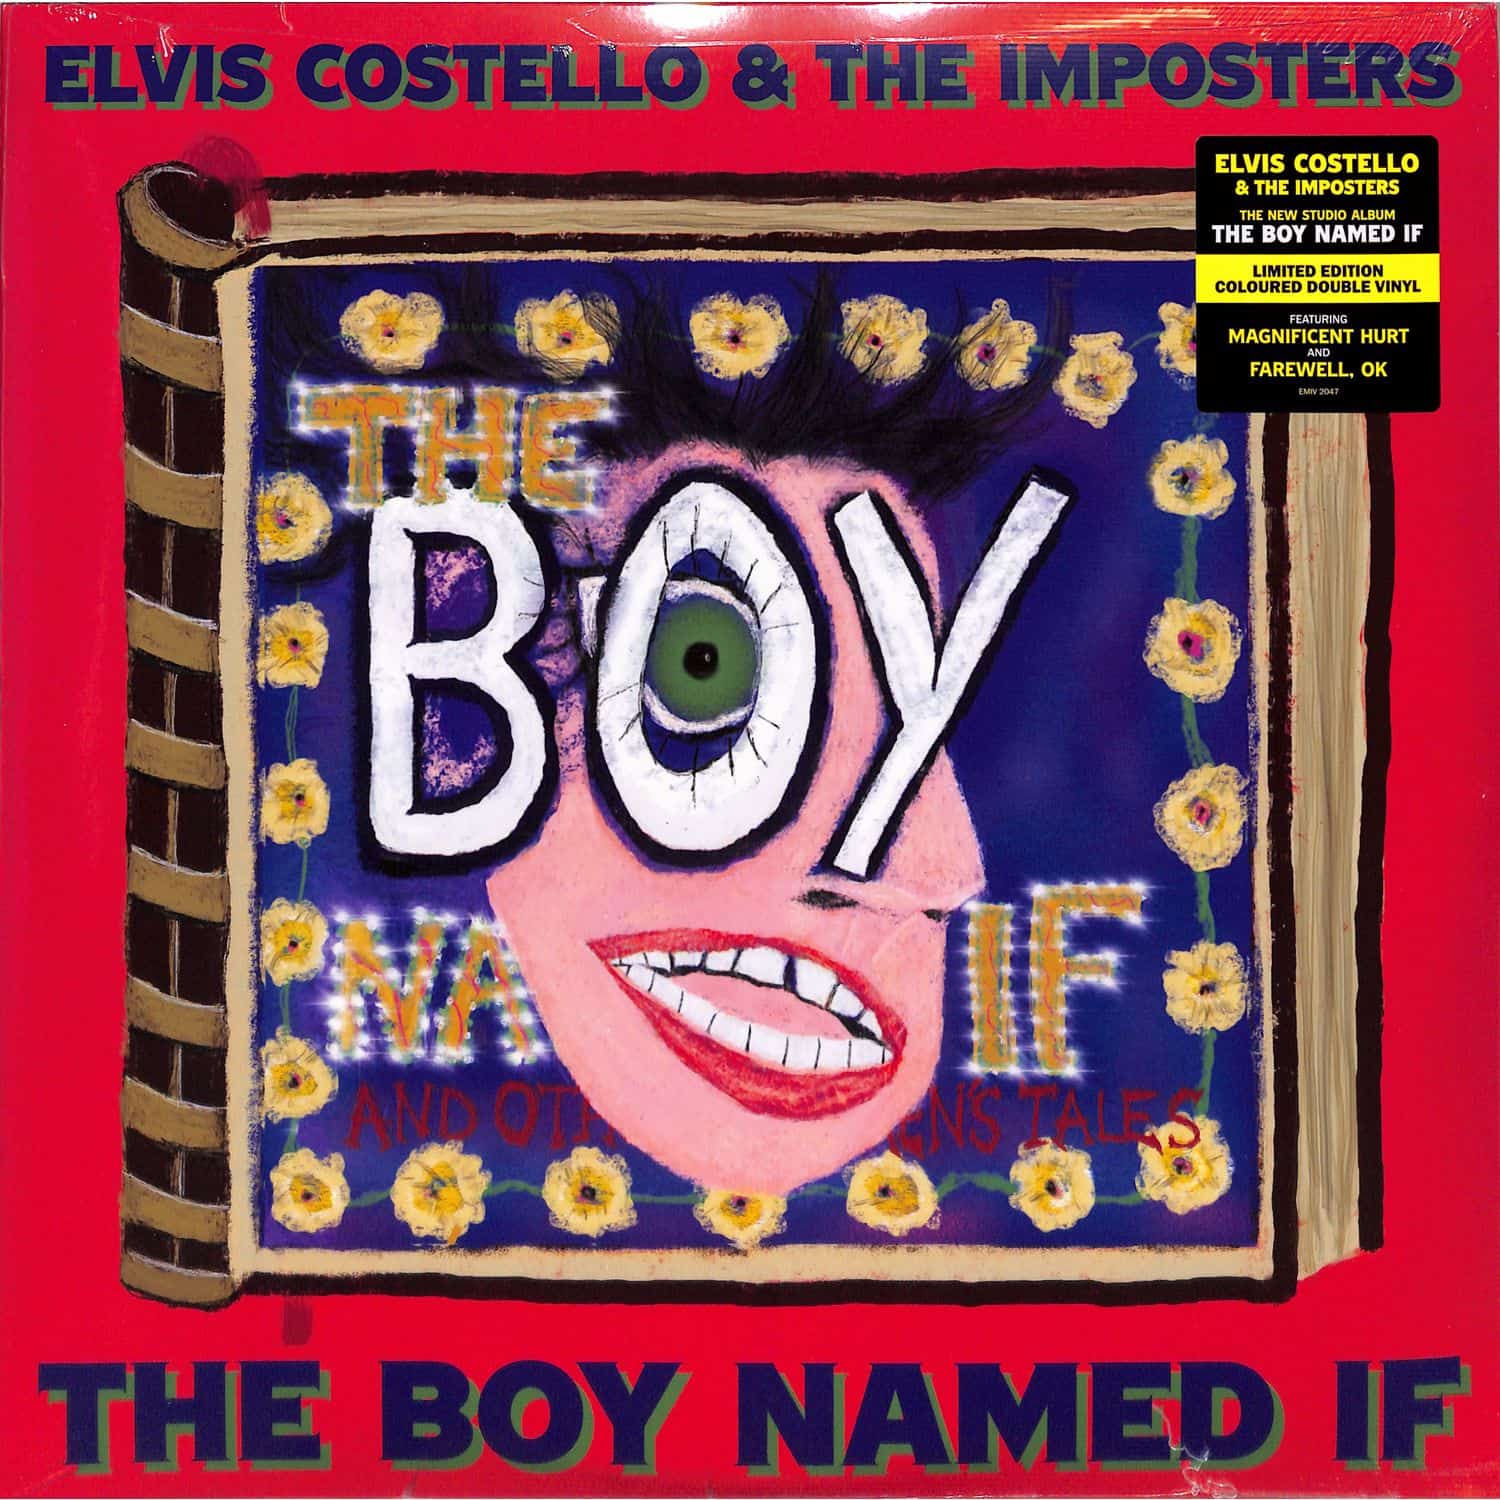 Elvis Costello & The Imposters - BOY NAMED IF 